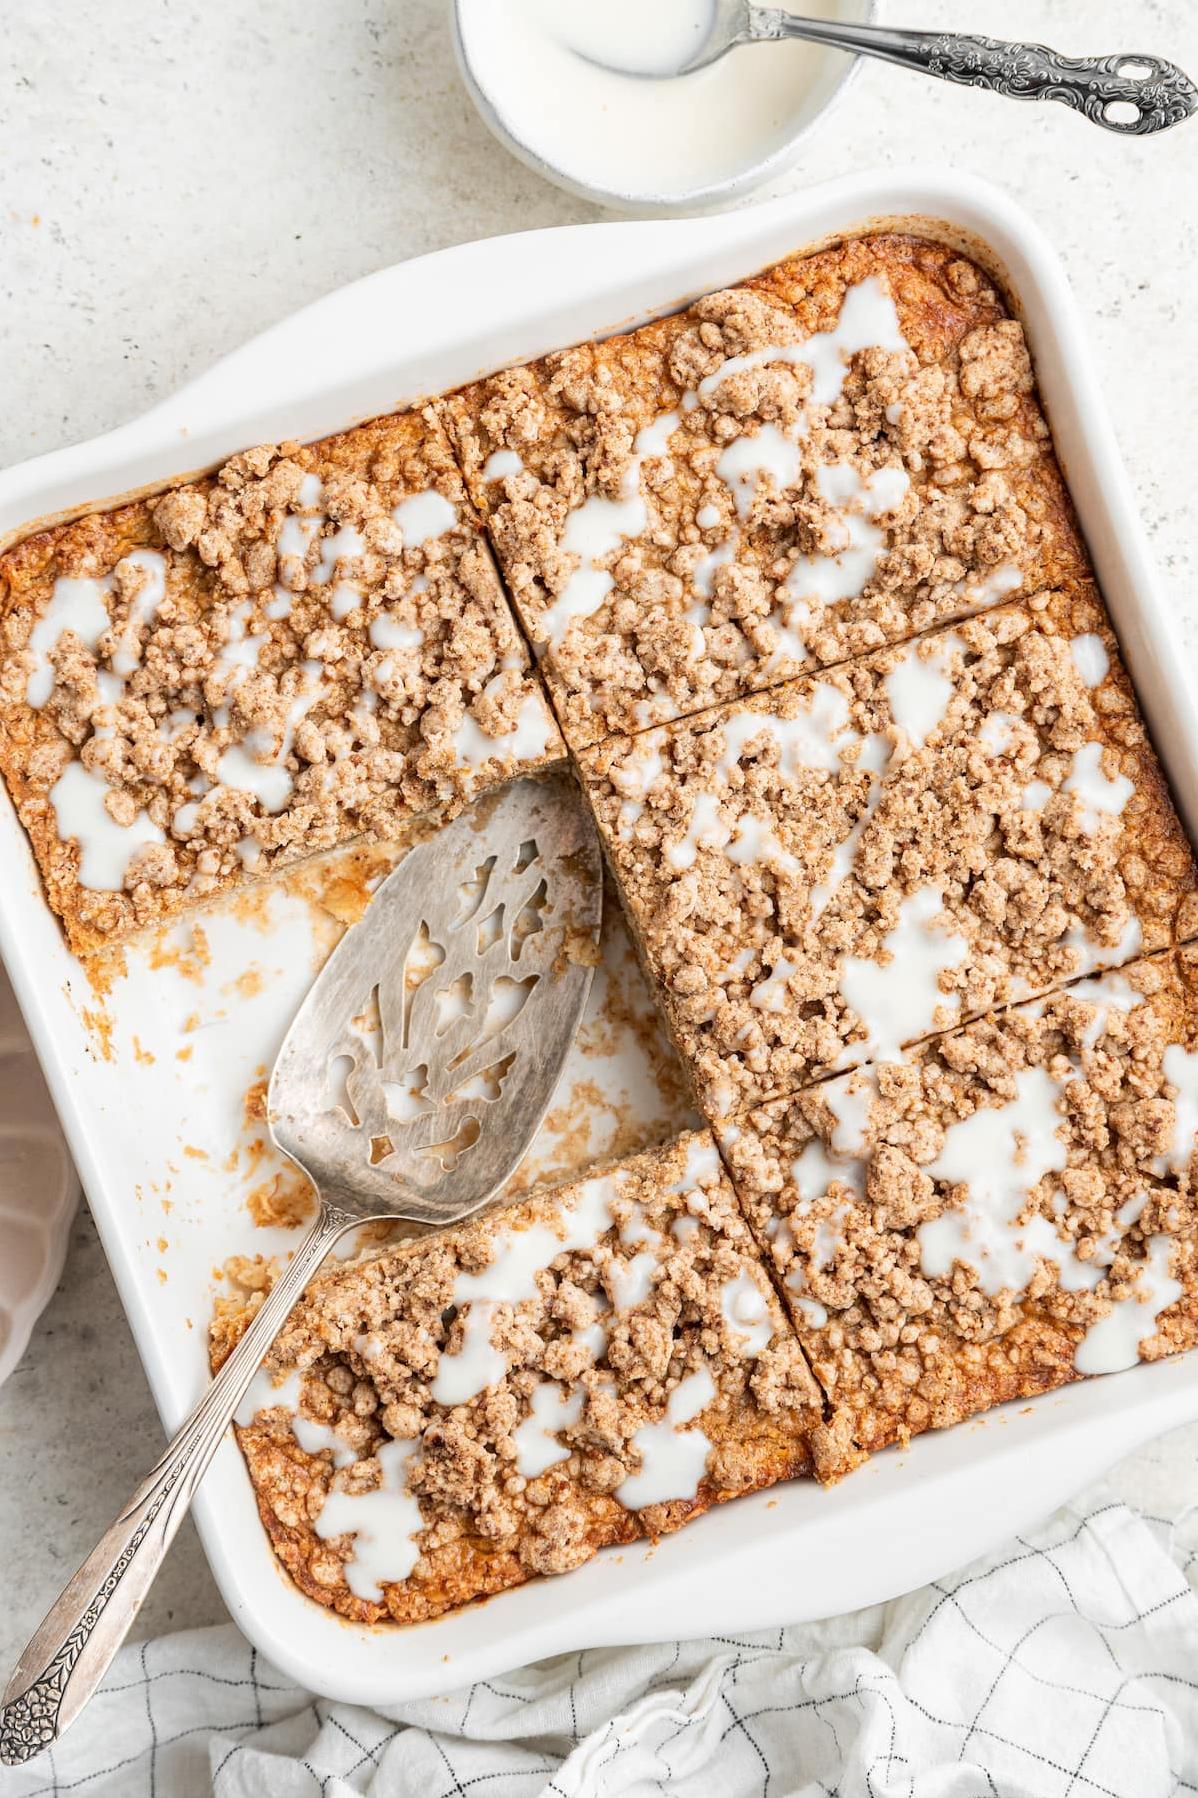  Get ready to start your day on a delicious note with this oatmeal coffee cake!